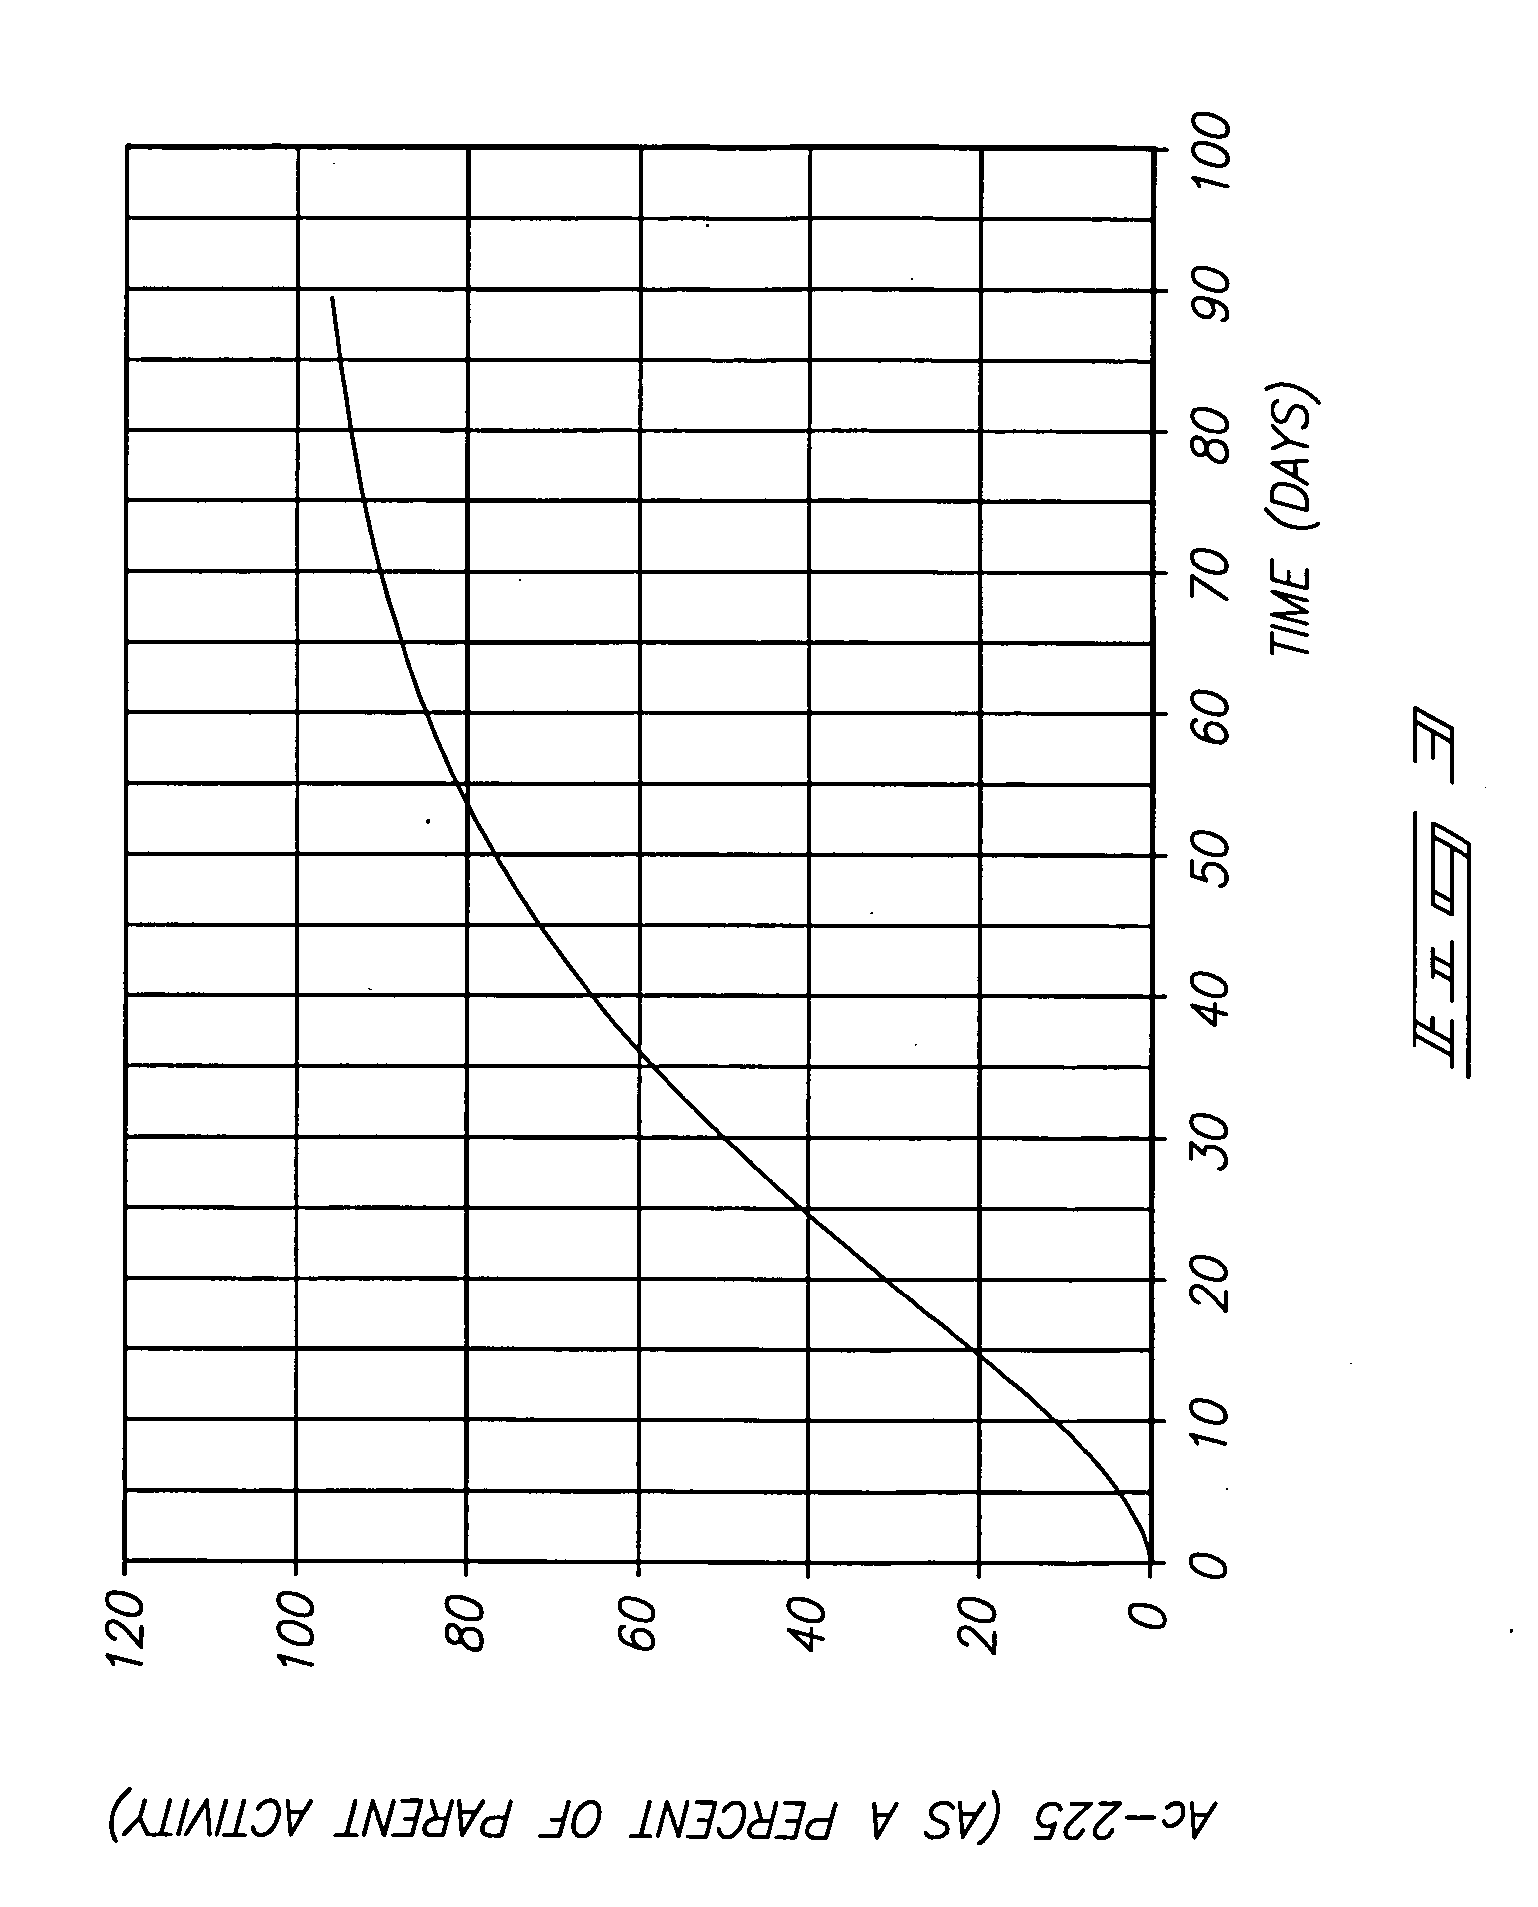 System for recovery of daughter isotopes from a source material